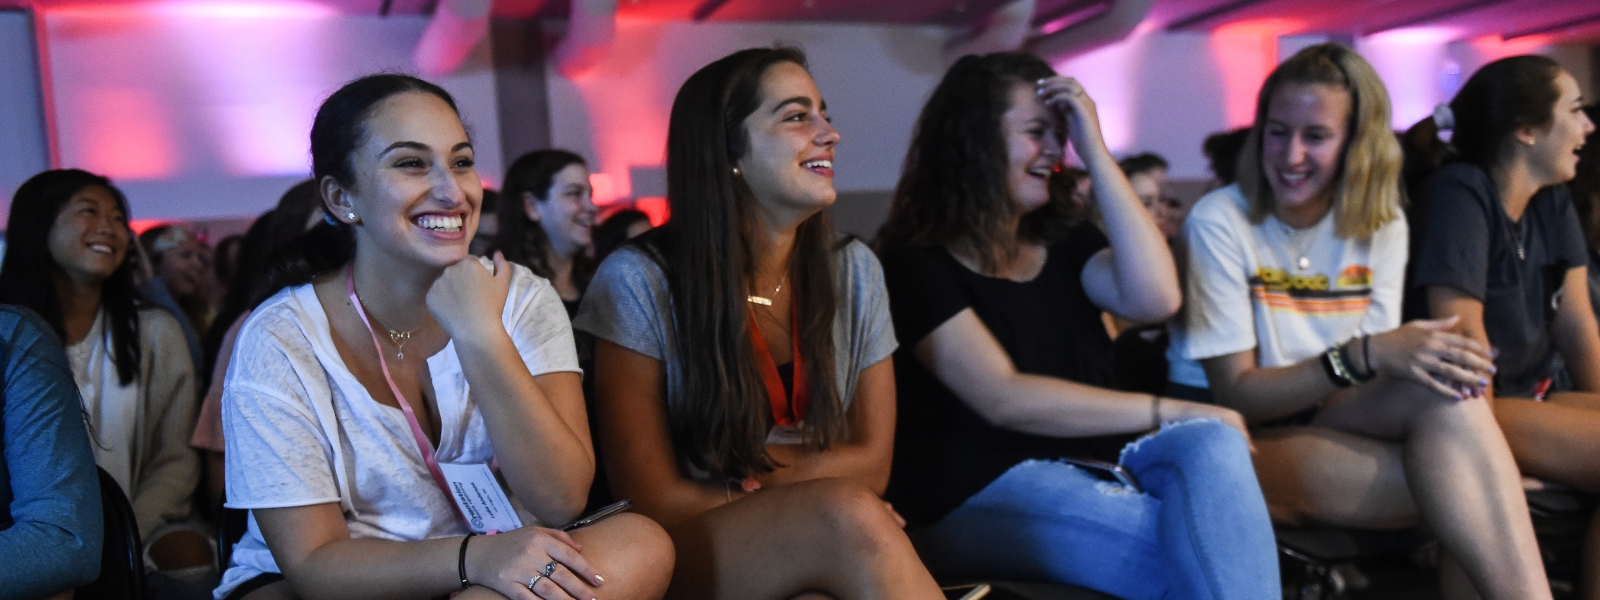 Female students laughing during Orientation event